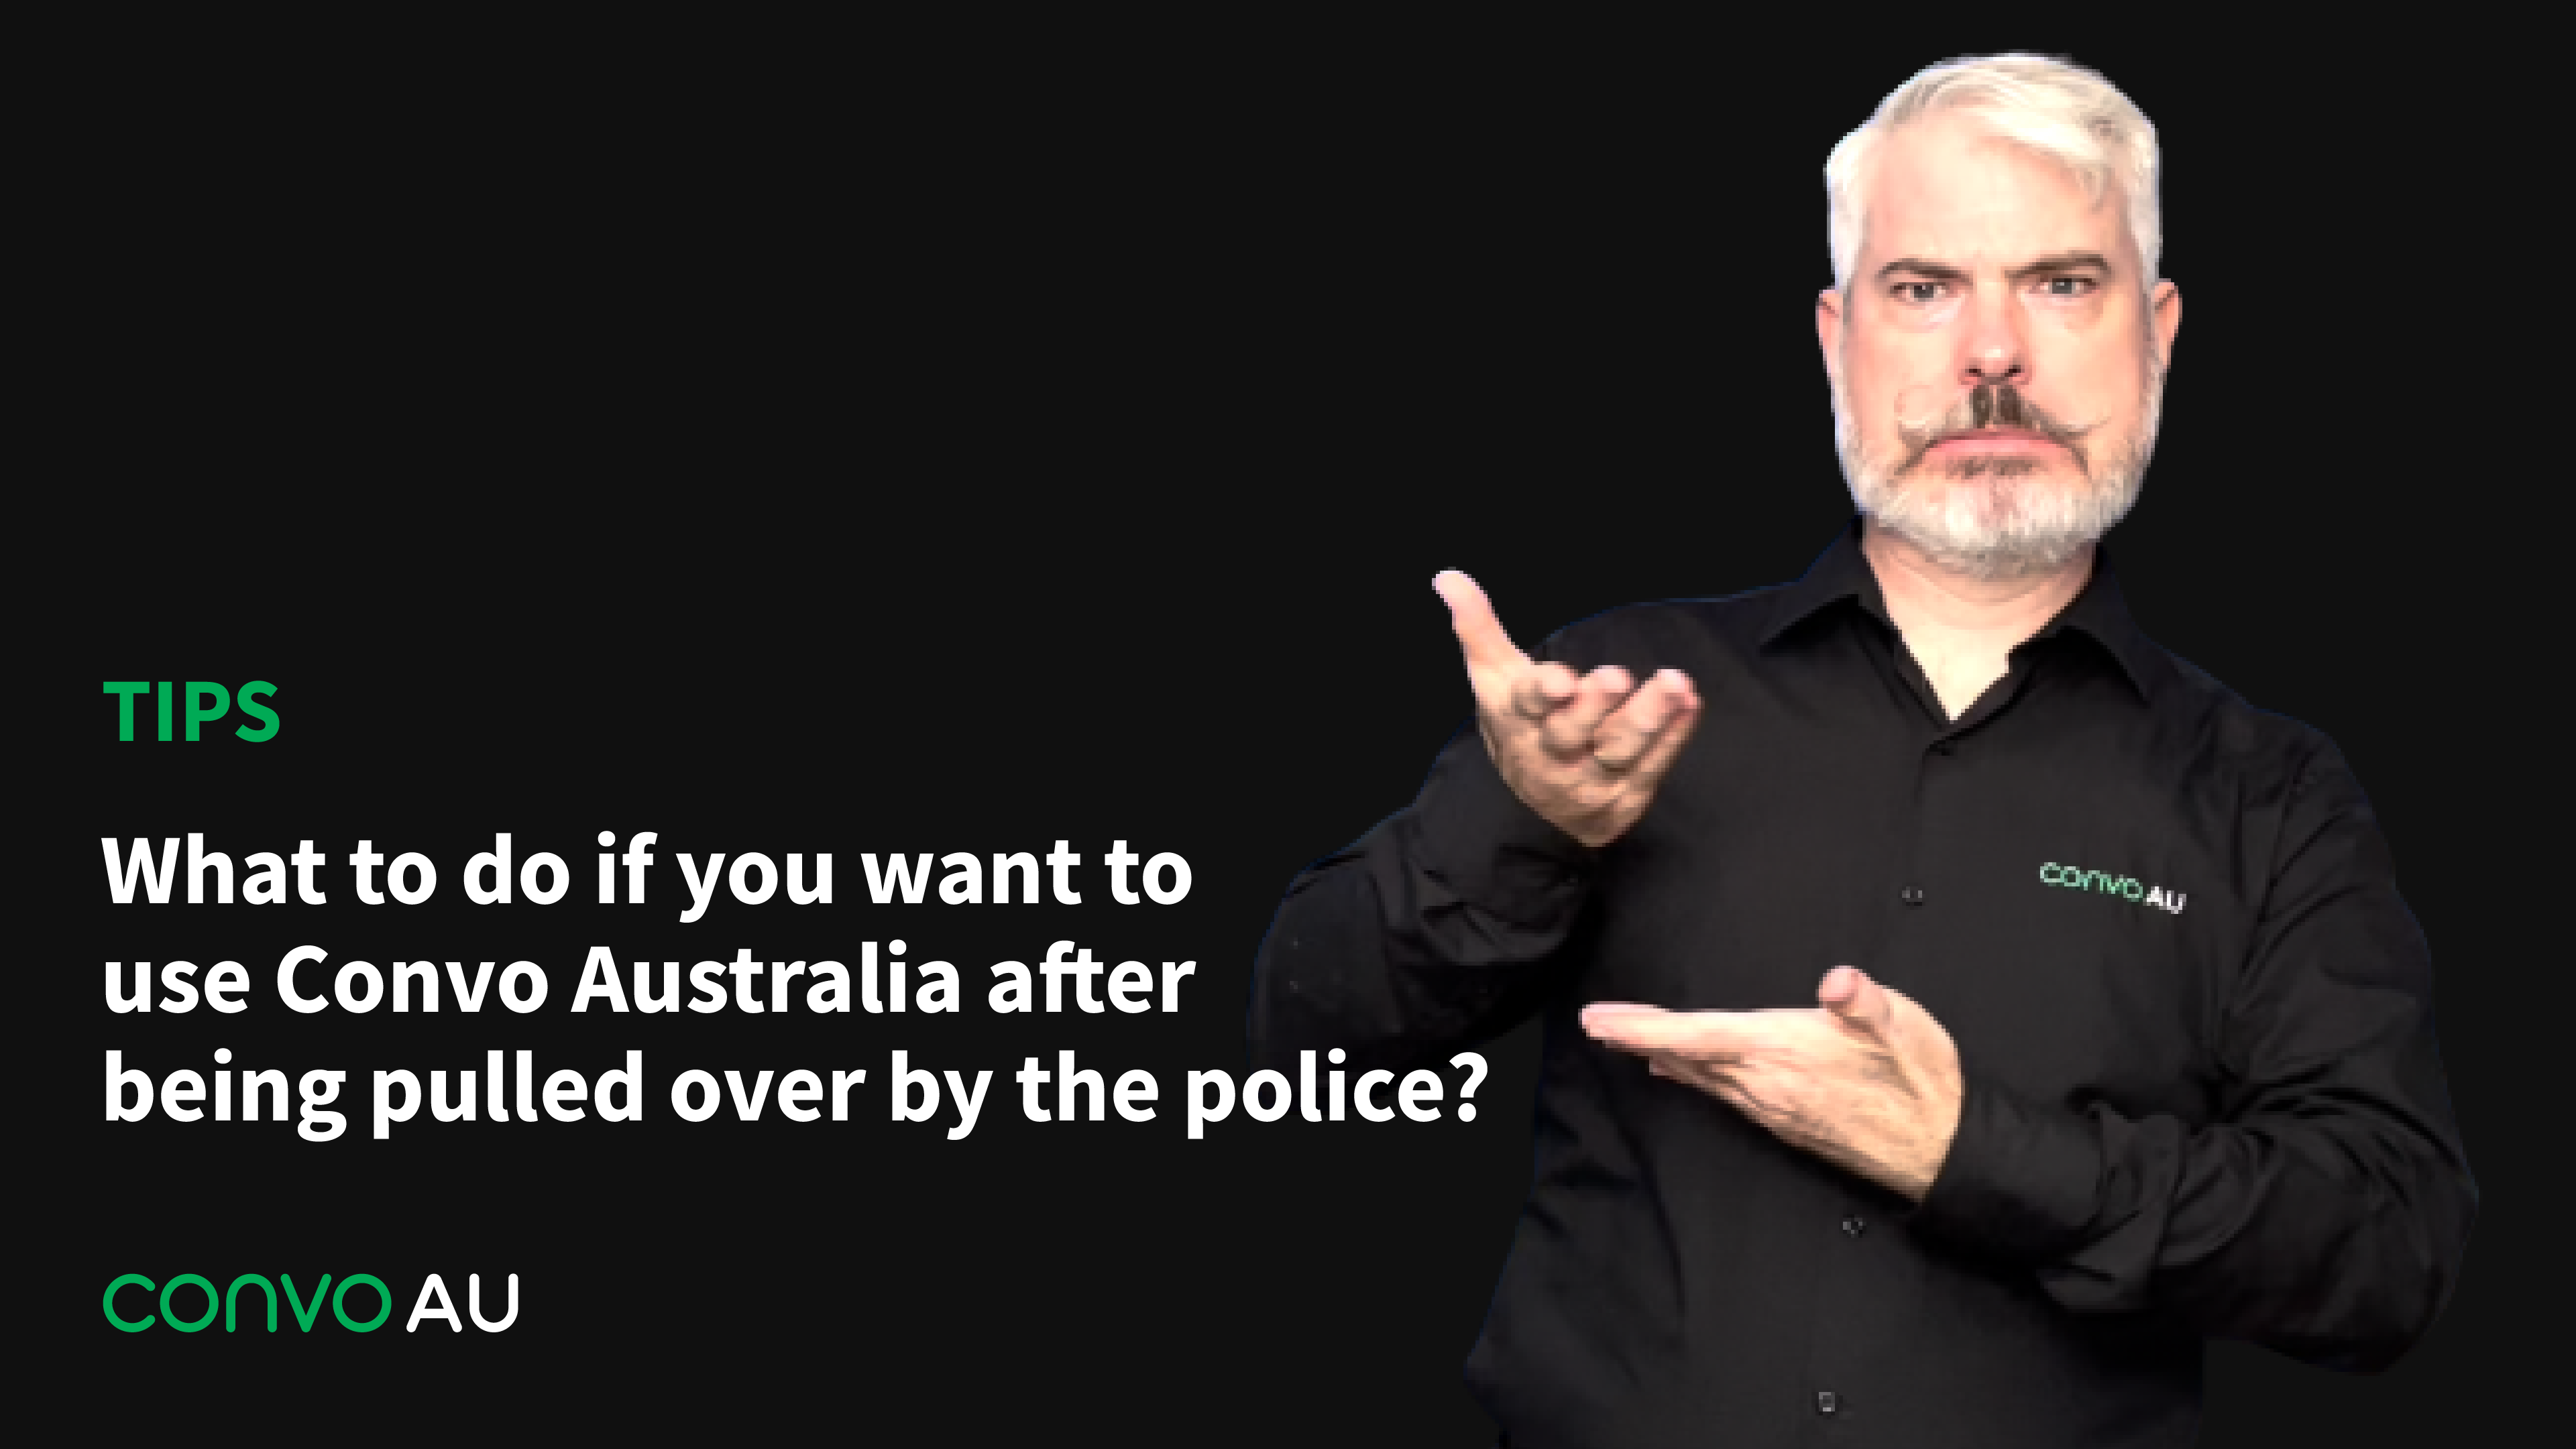 Tips: What to do if you want to use Convo Australia after being pulled over by the police?